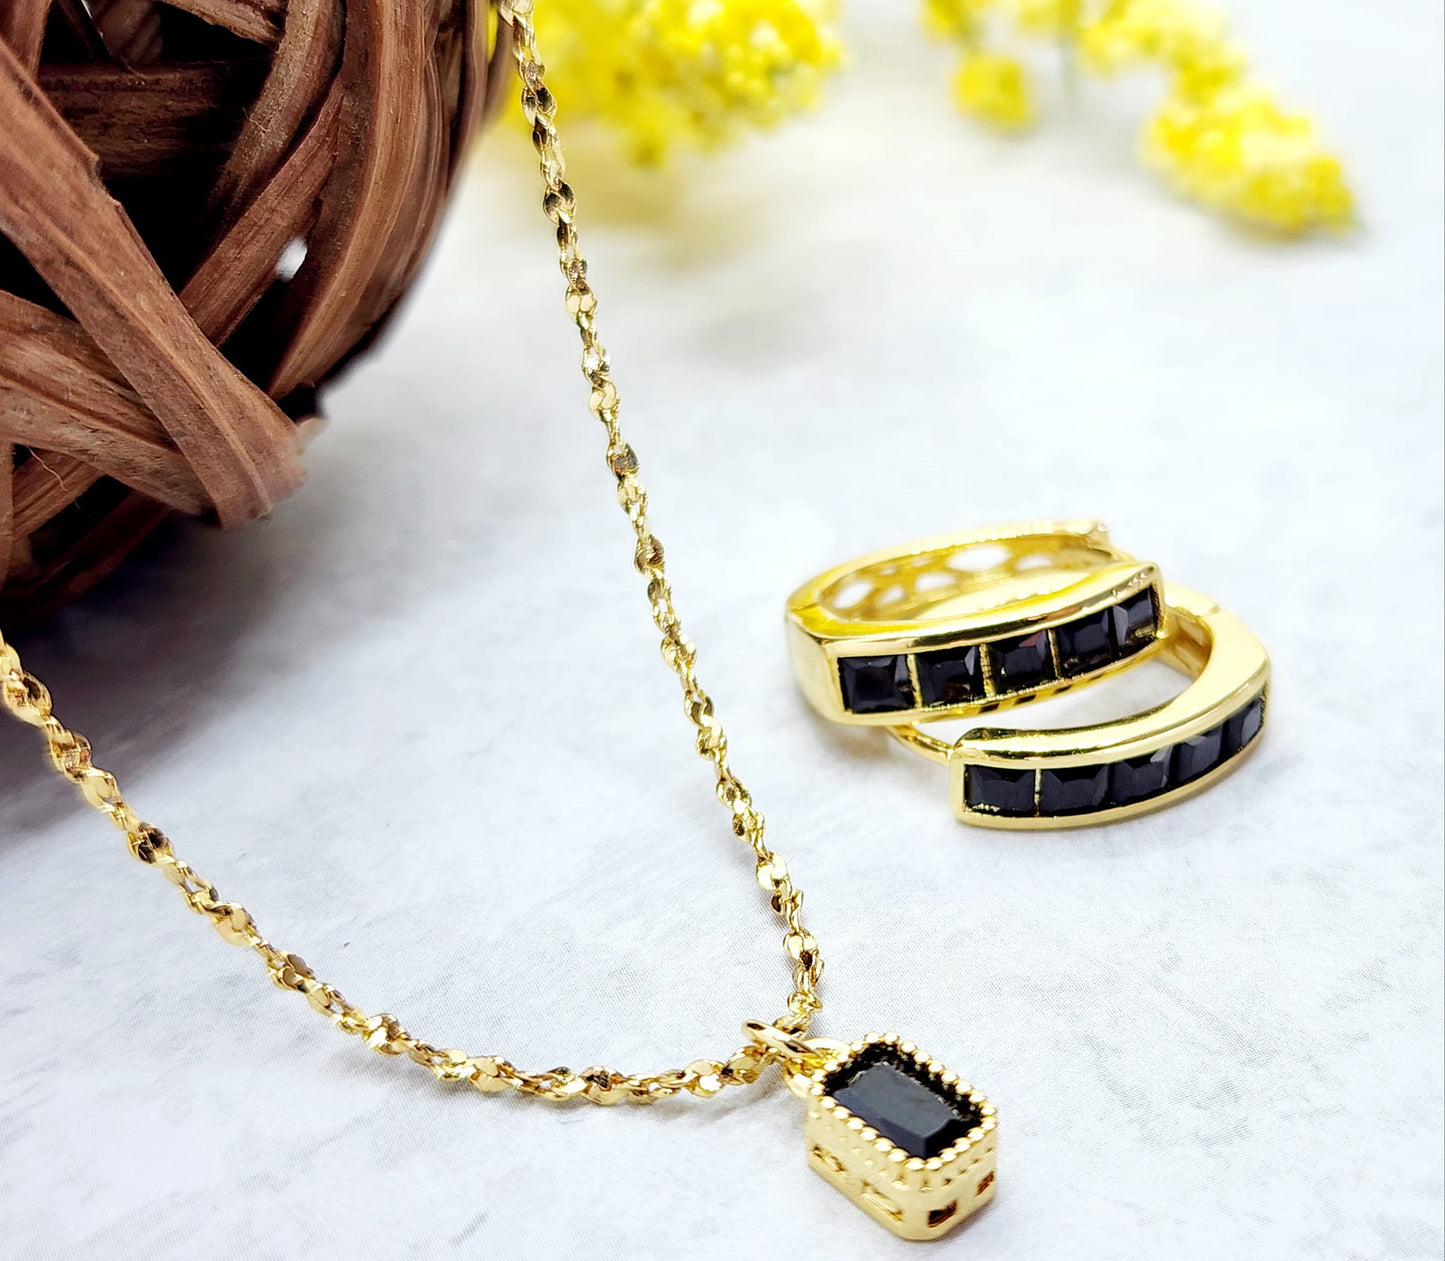 Birthstone Necklace and Earring Set 18K Gold Plated - Black Stone